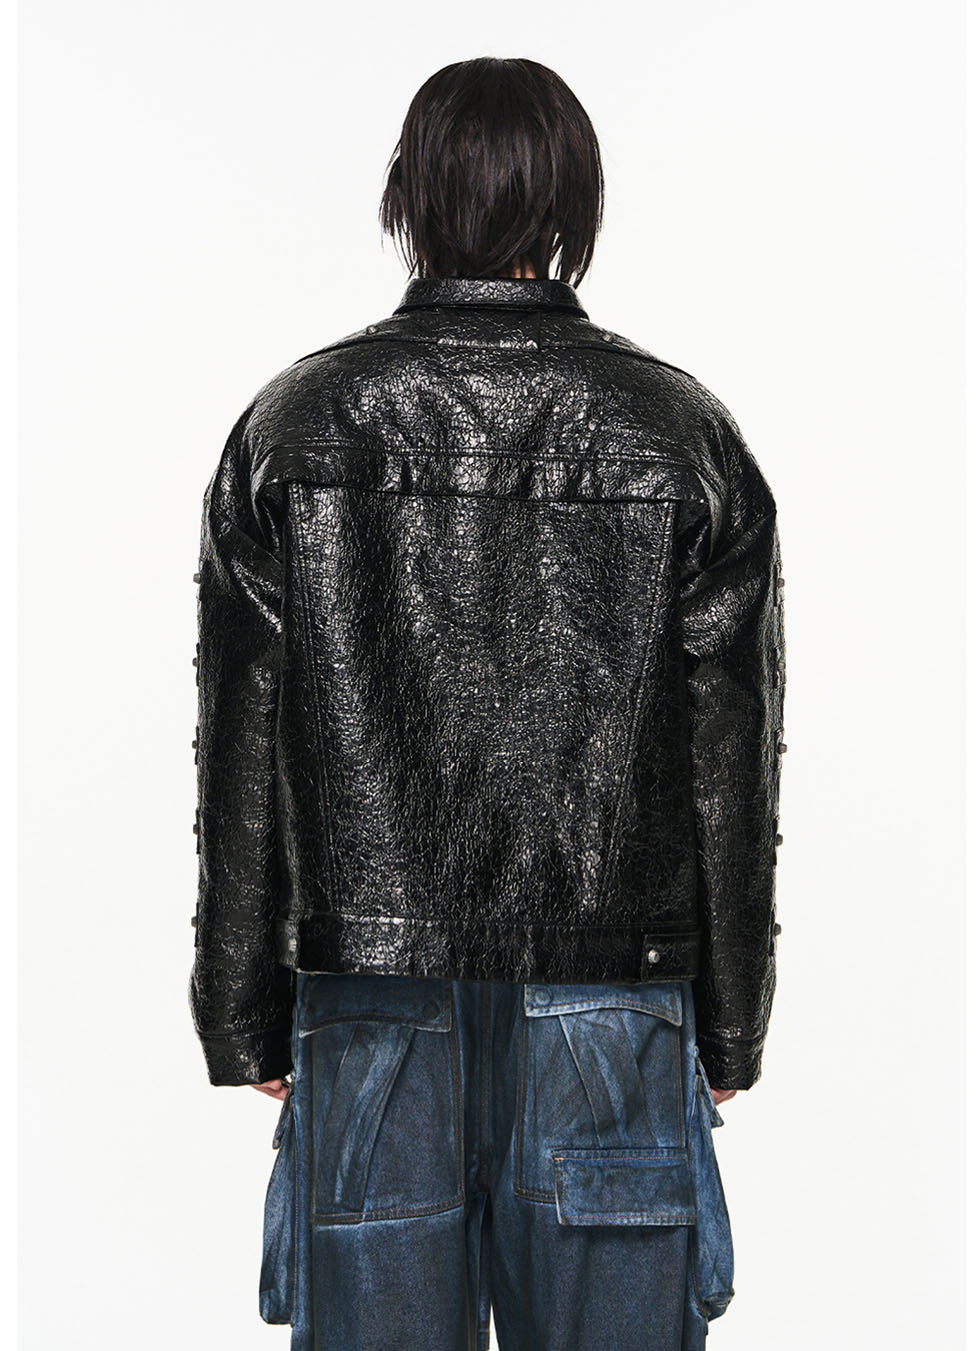 Cracked textured leather riveted lapel cotton jacket